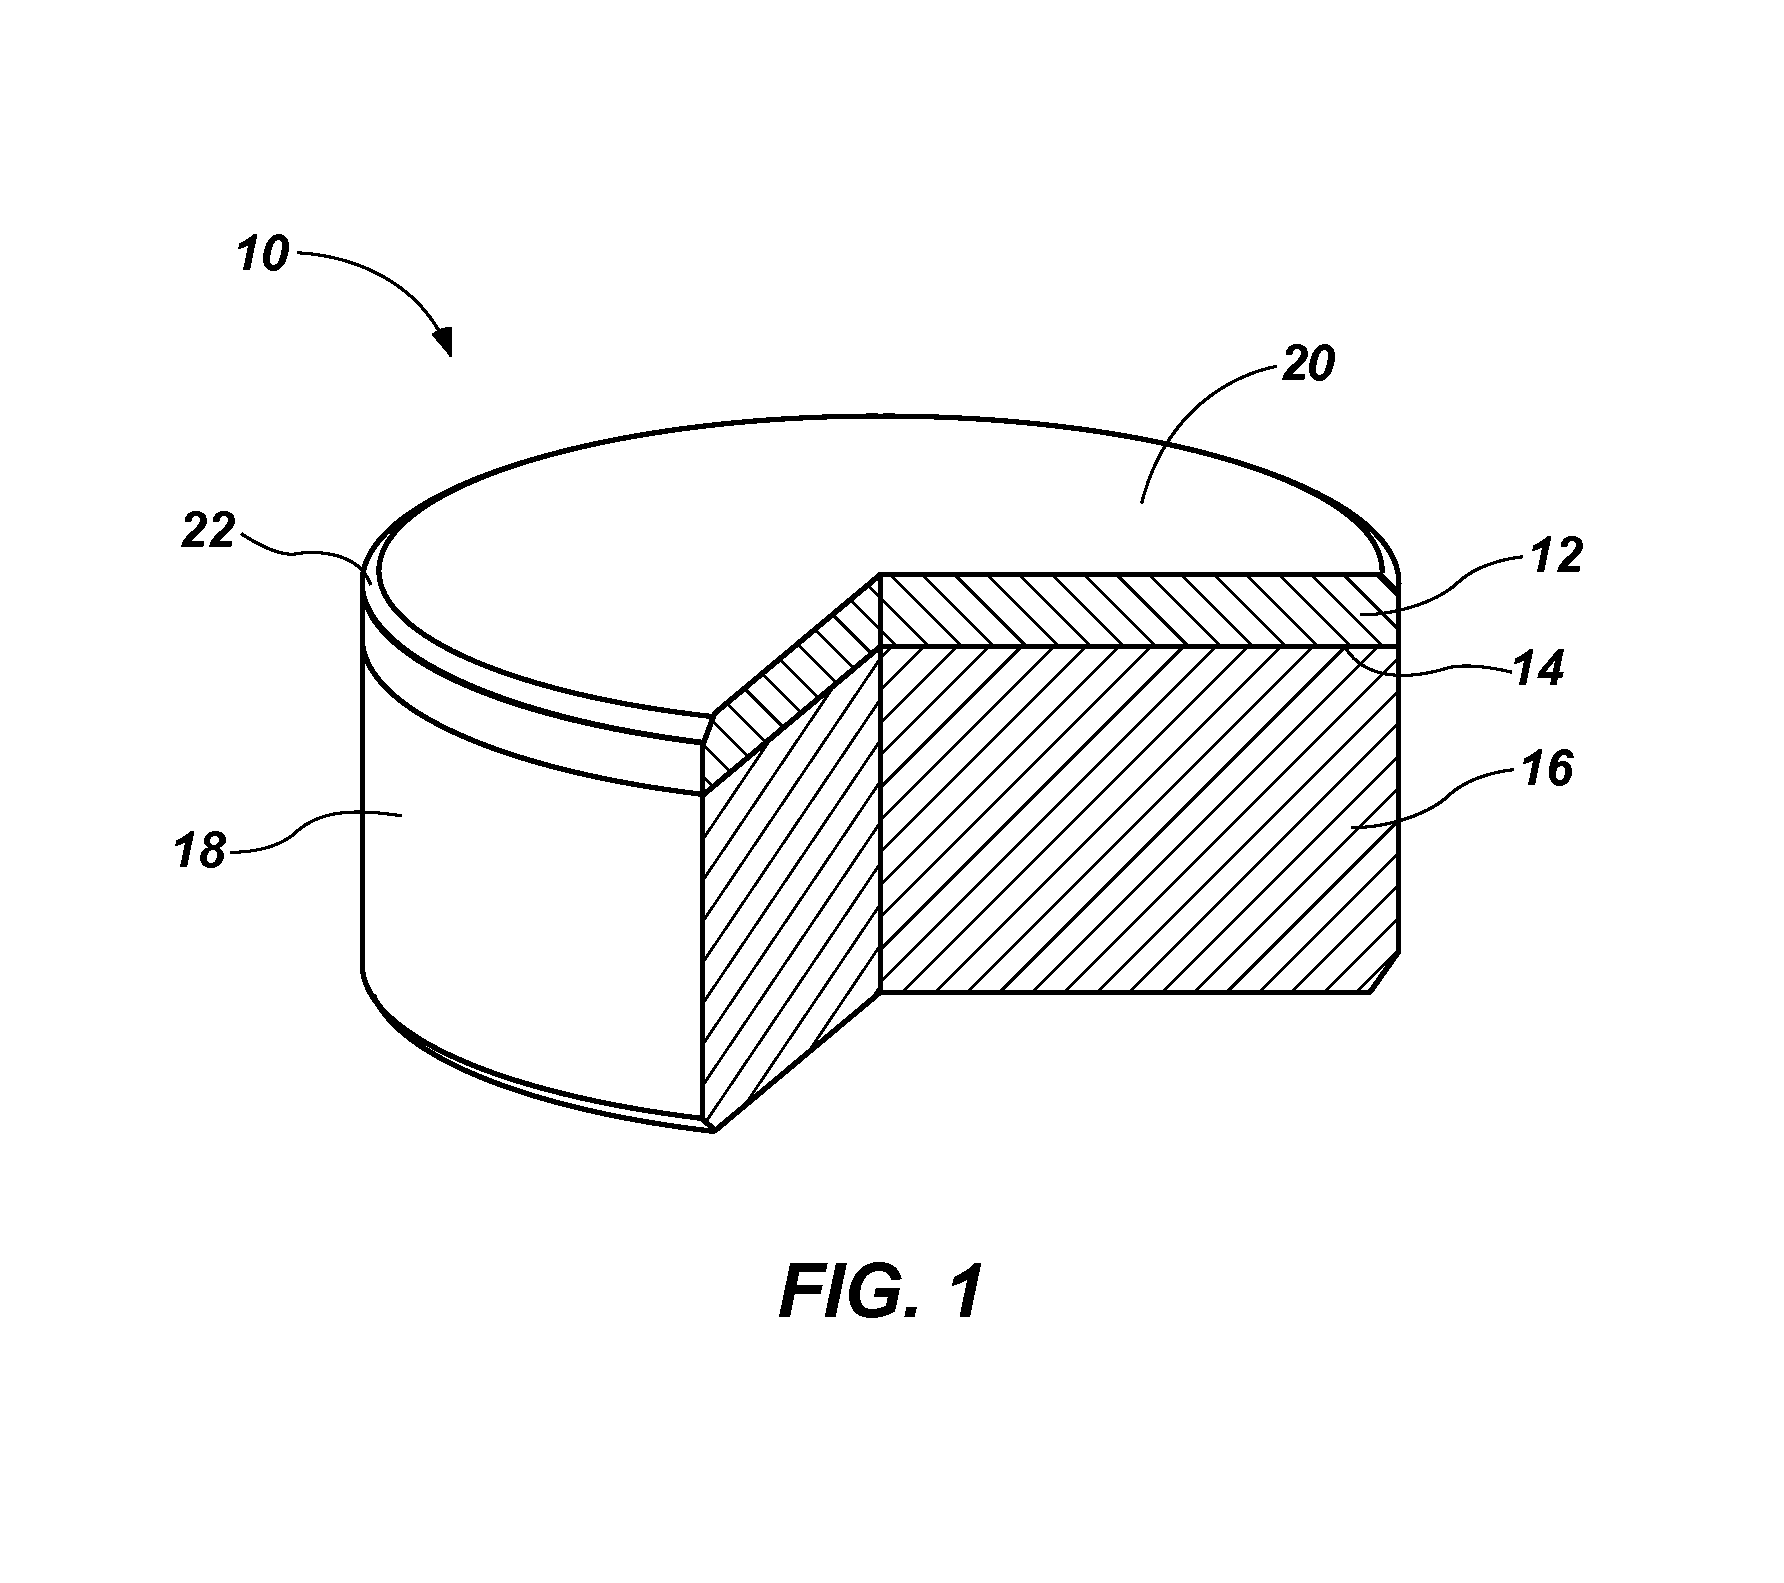 Methods of forming cutting elements by removing metal from interstitial spaces in polycrystalline diamond